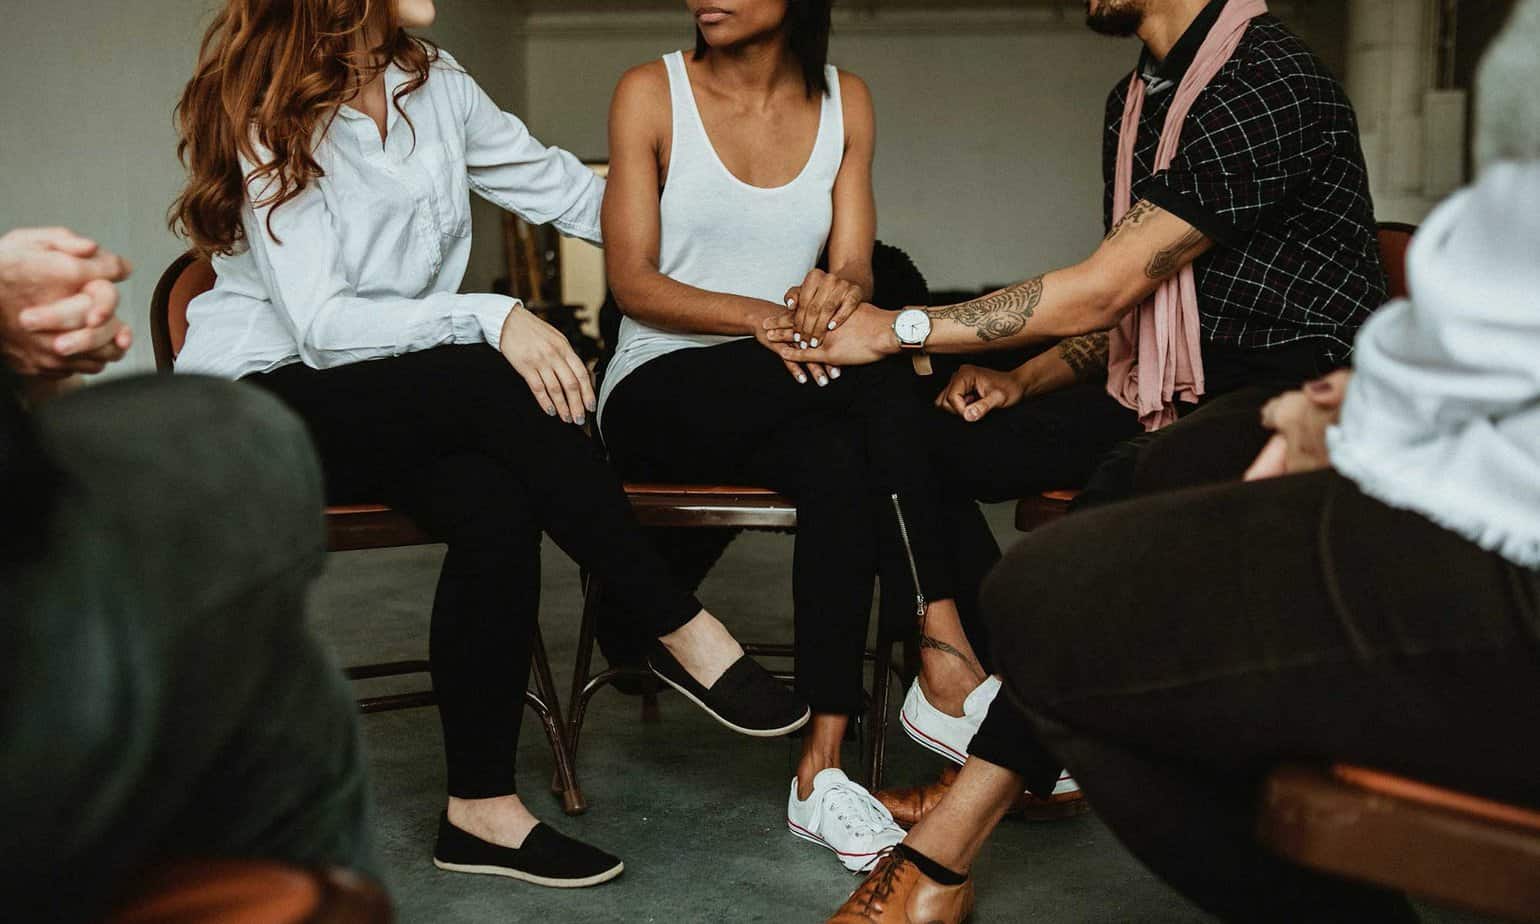 Three young individuals attending an AA meeting supporting and comforting each other